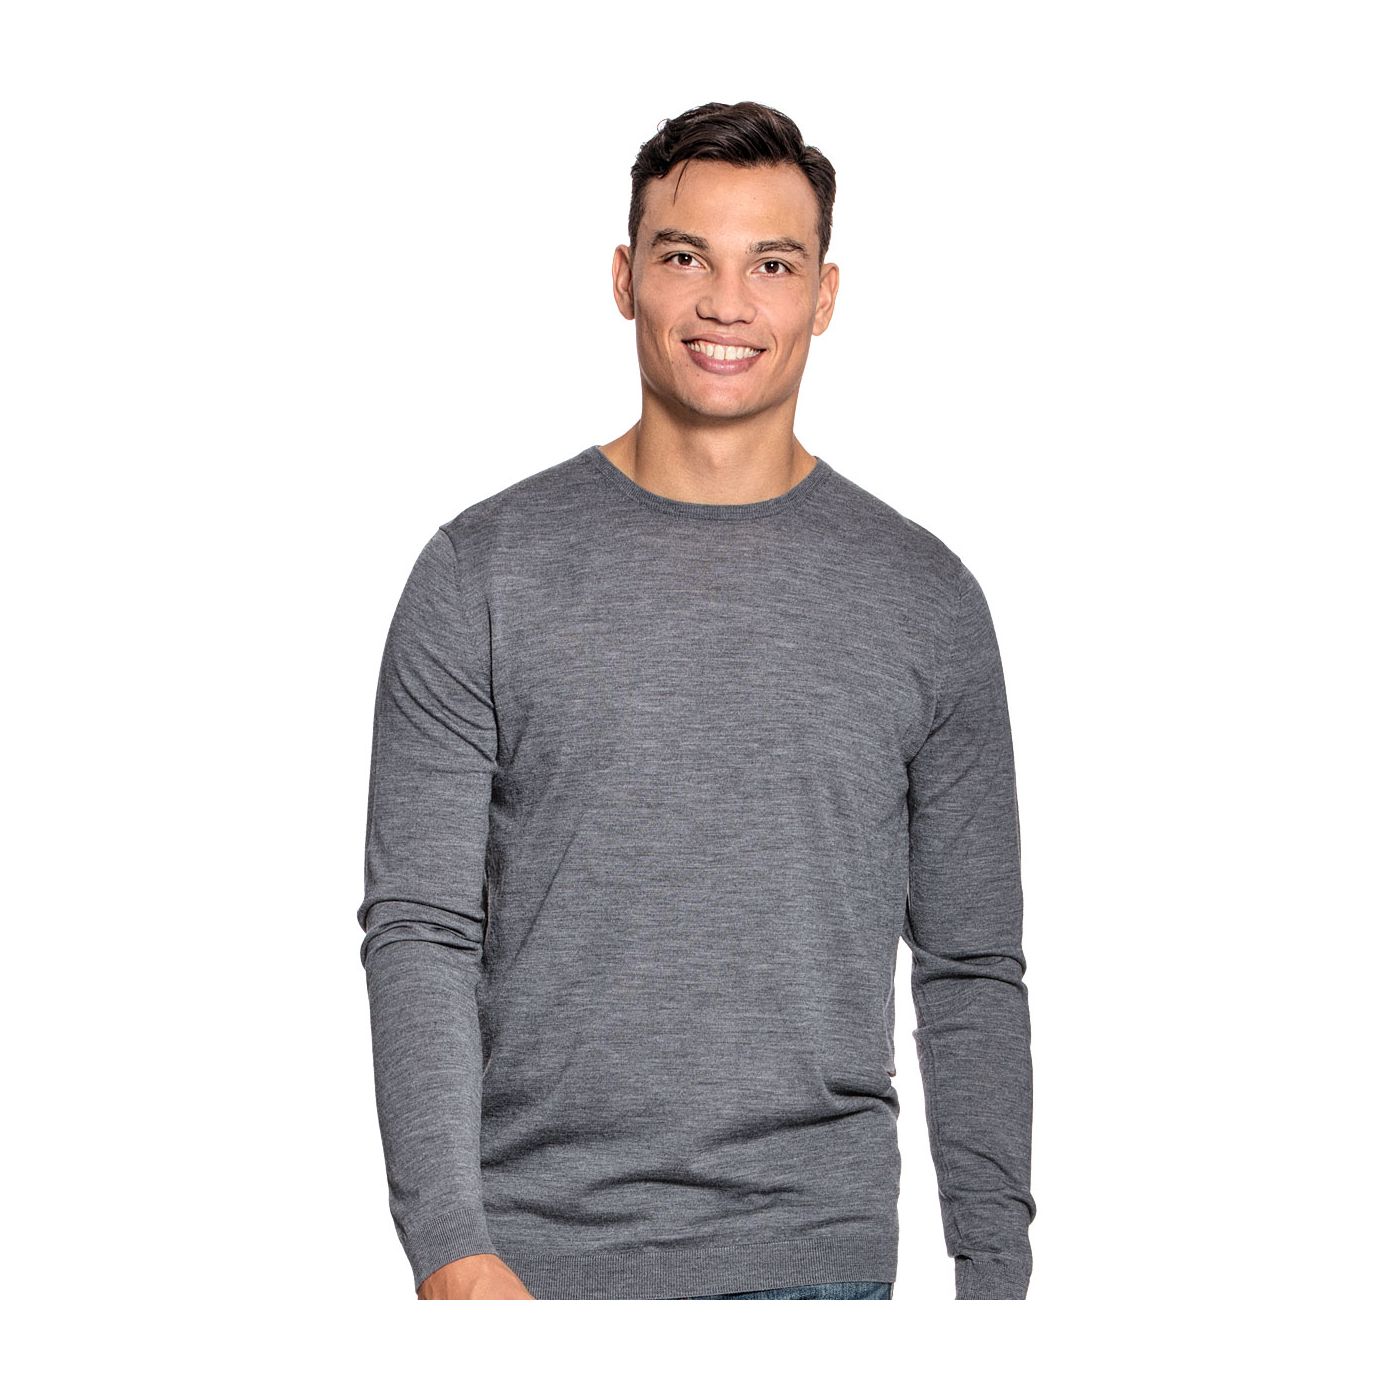 Extra long crew neck sweater for men made of Merino wool in Grey